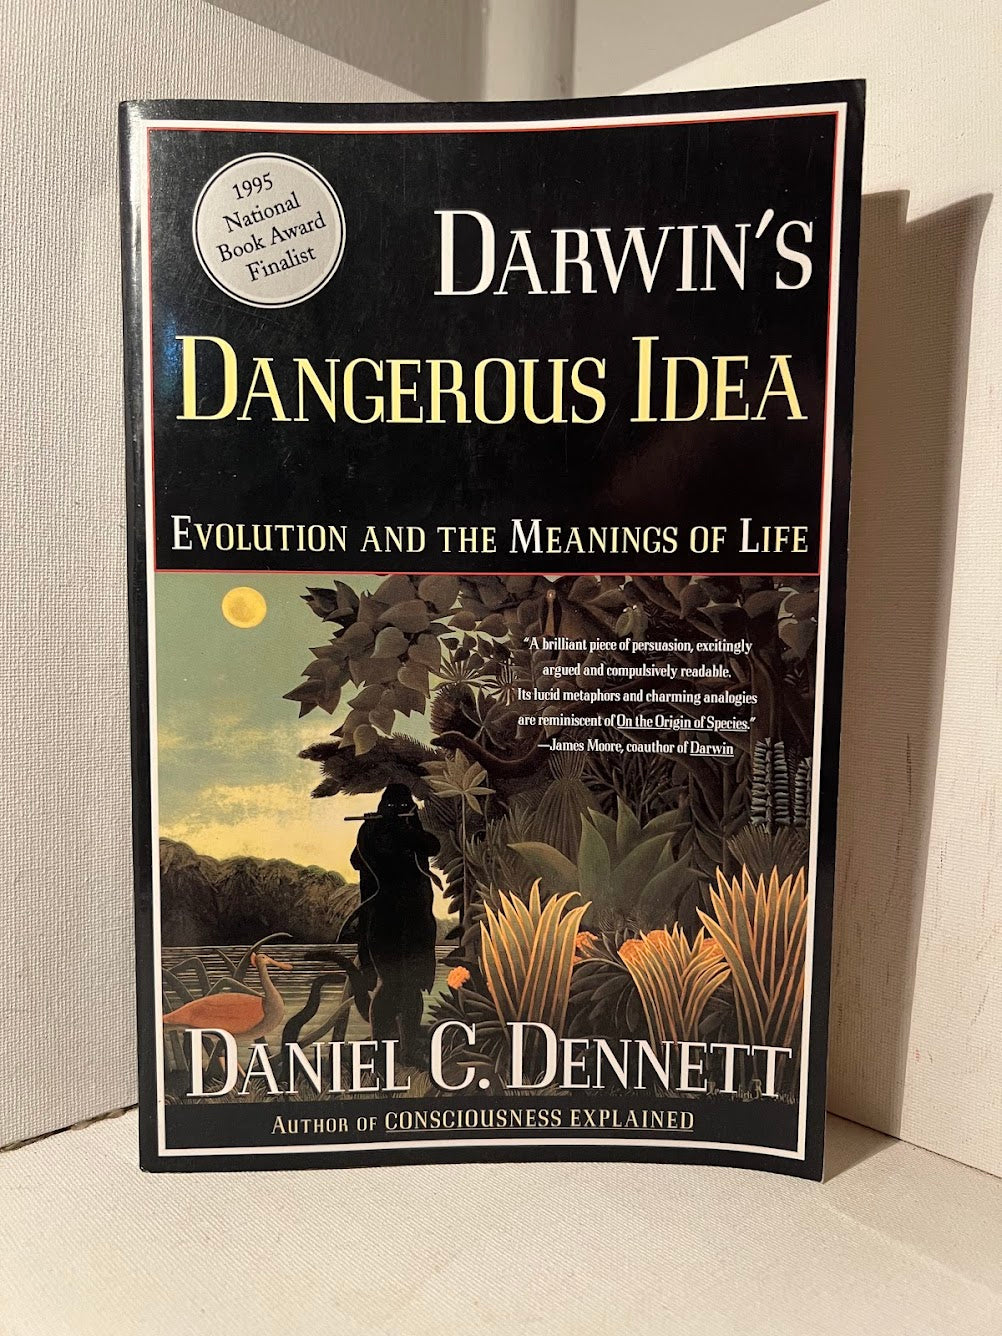 Darwin's Dangerous Idea - Evolution and the Meanings of Life by Daniel C. Dennett